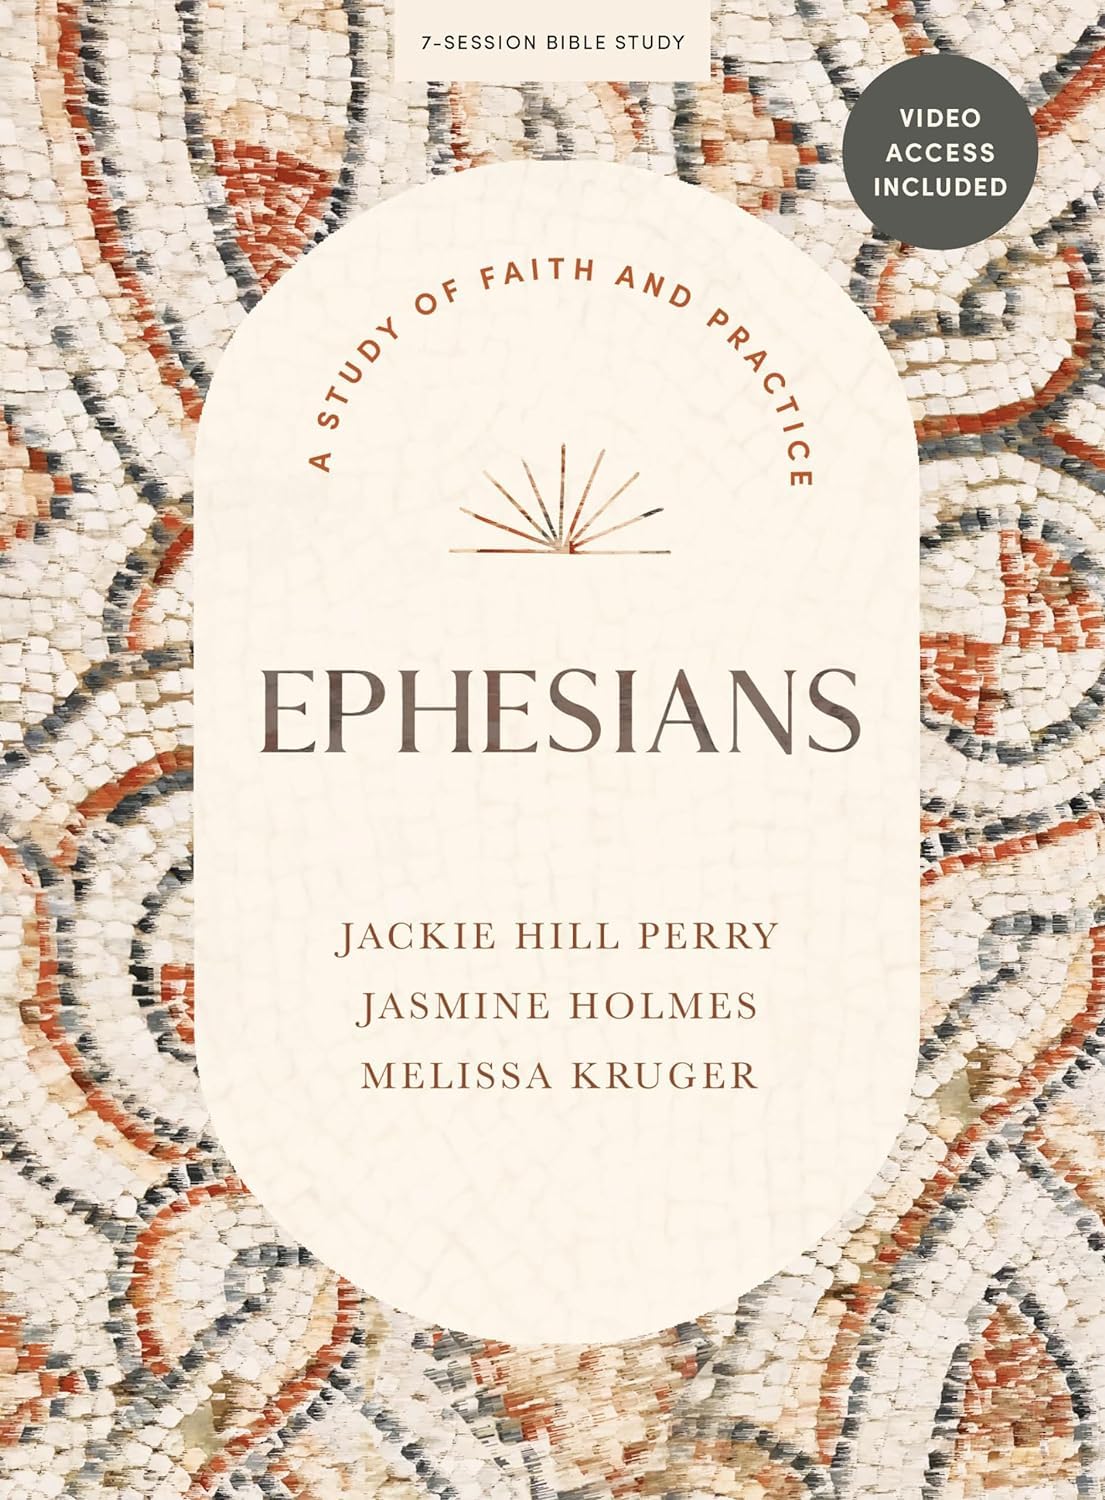 Ephesians - Bible Study Book with Video Access: A Study of Faith and Practice by Perry, Jackie Hill